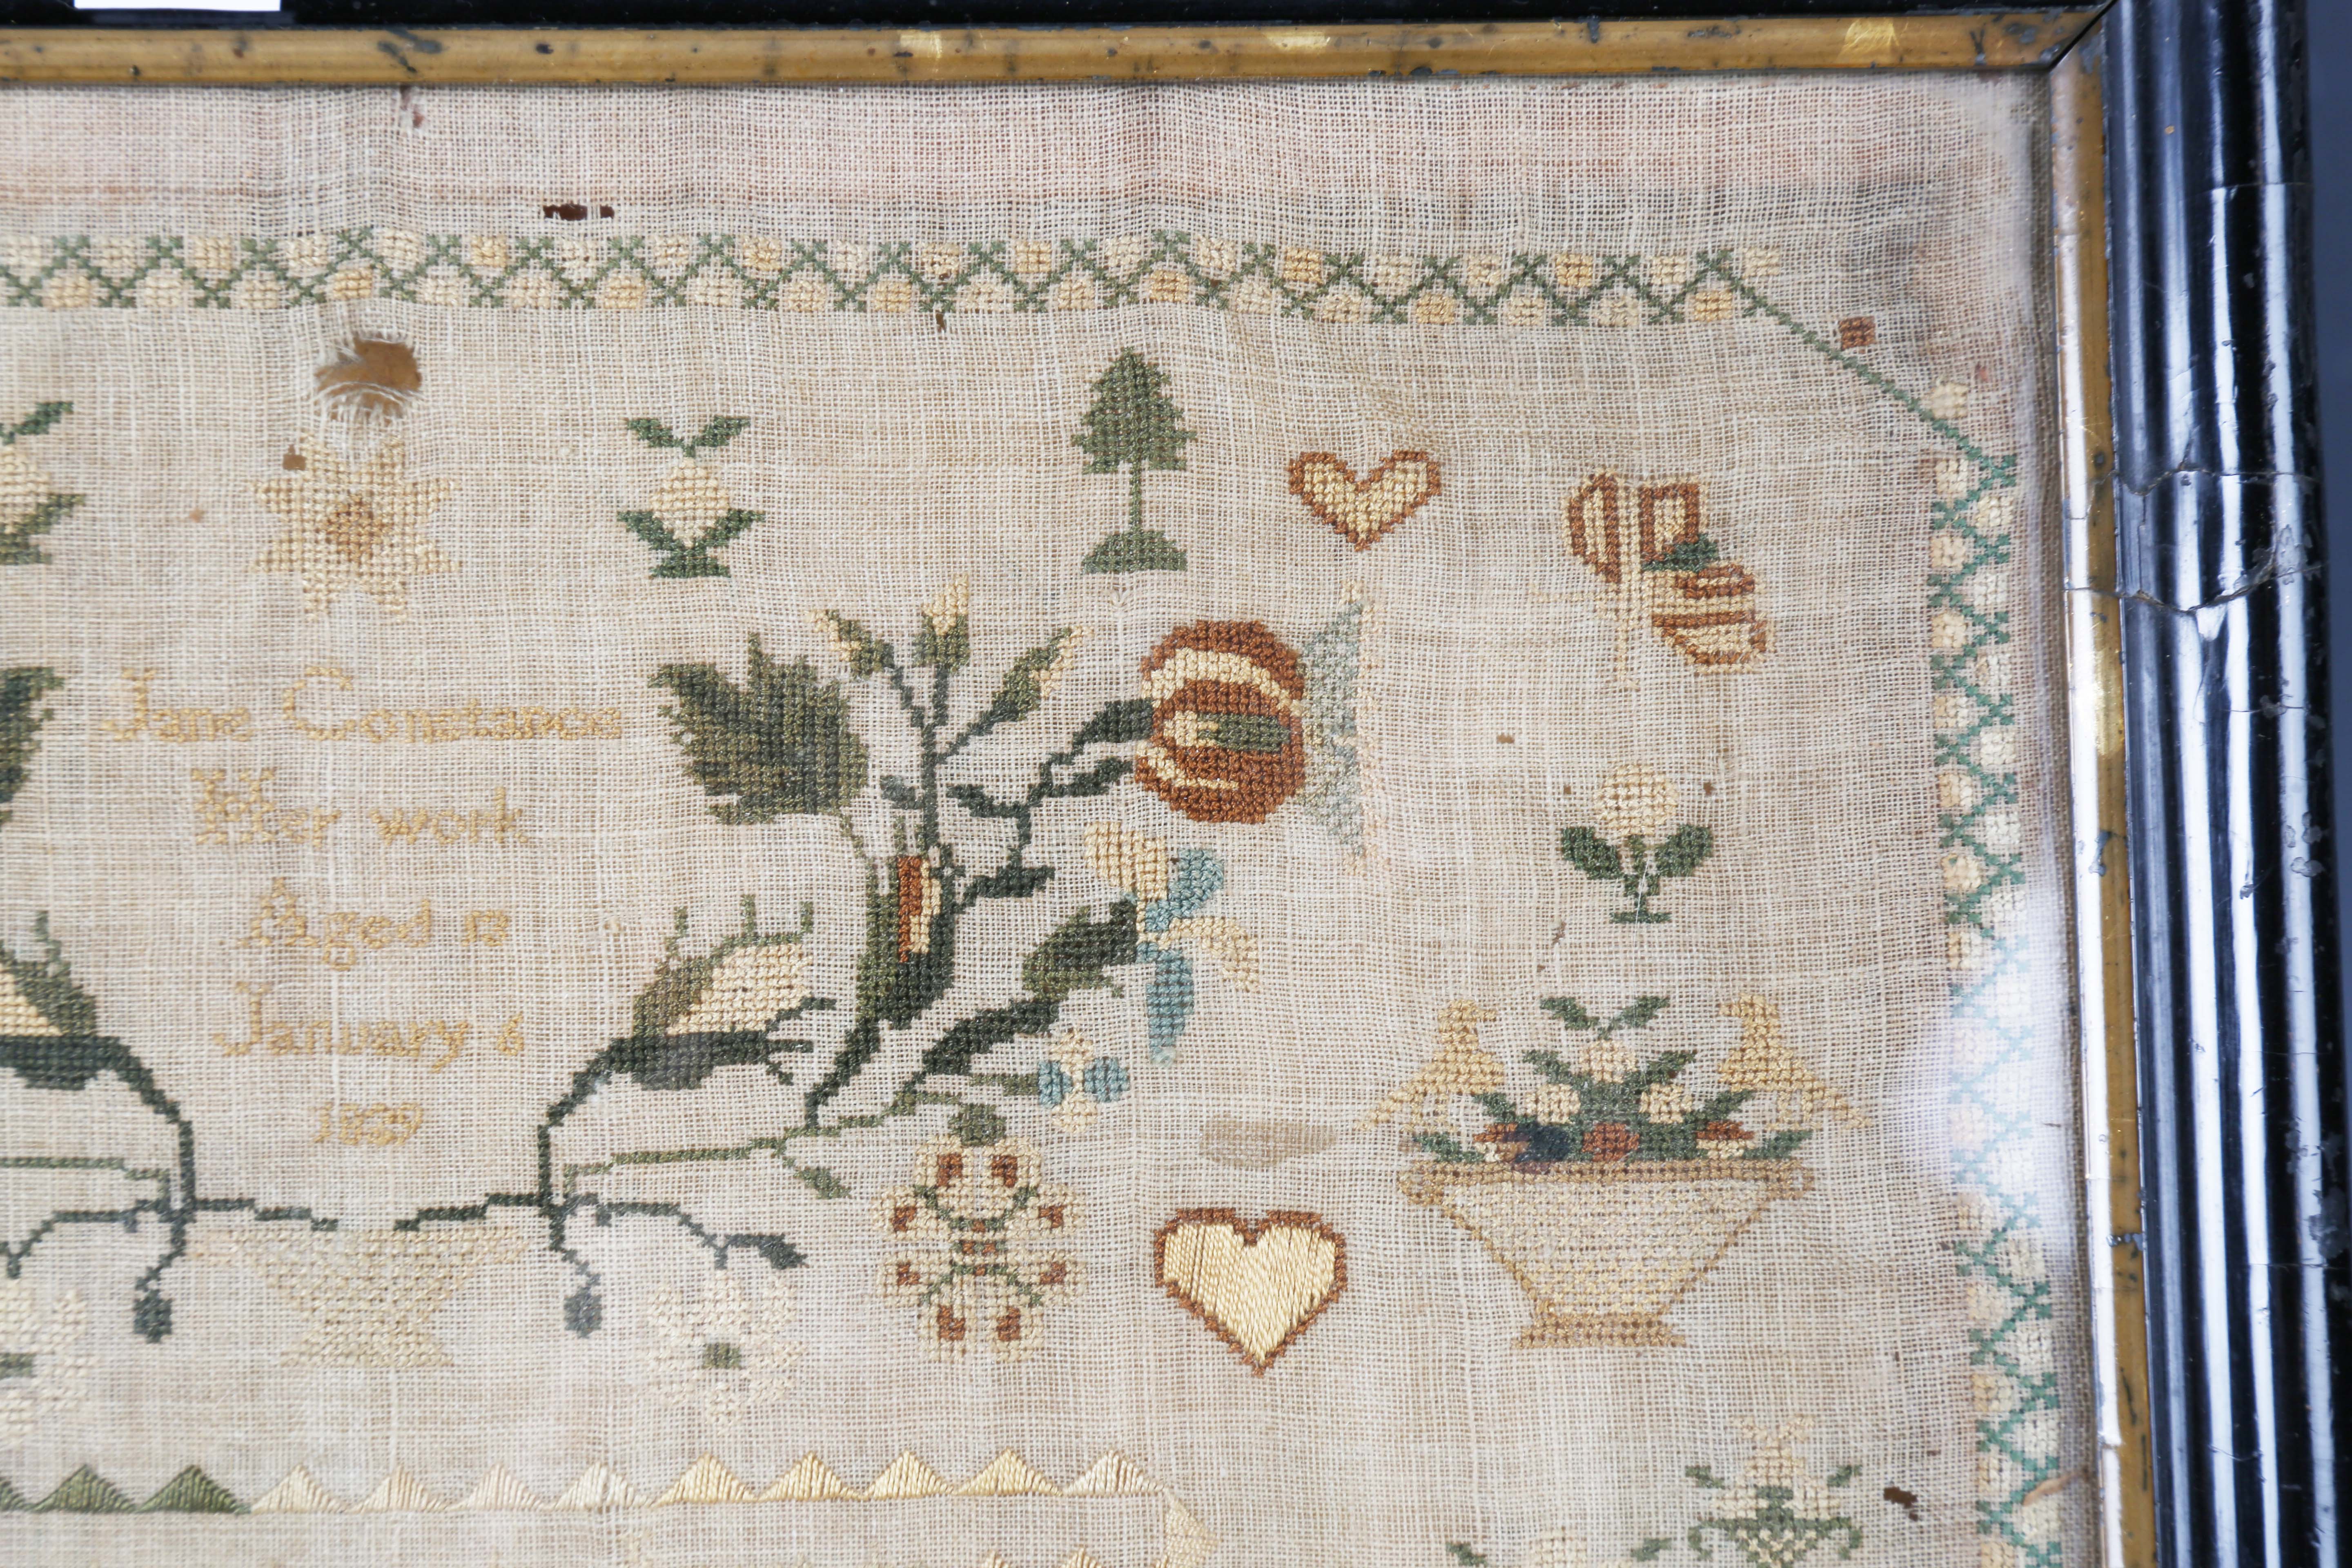 An early Victorian needlework sampler by Jane Constance, aged 13, dated 'January 6 1839', finely - Image 6 of 14